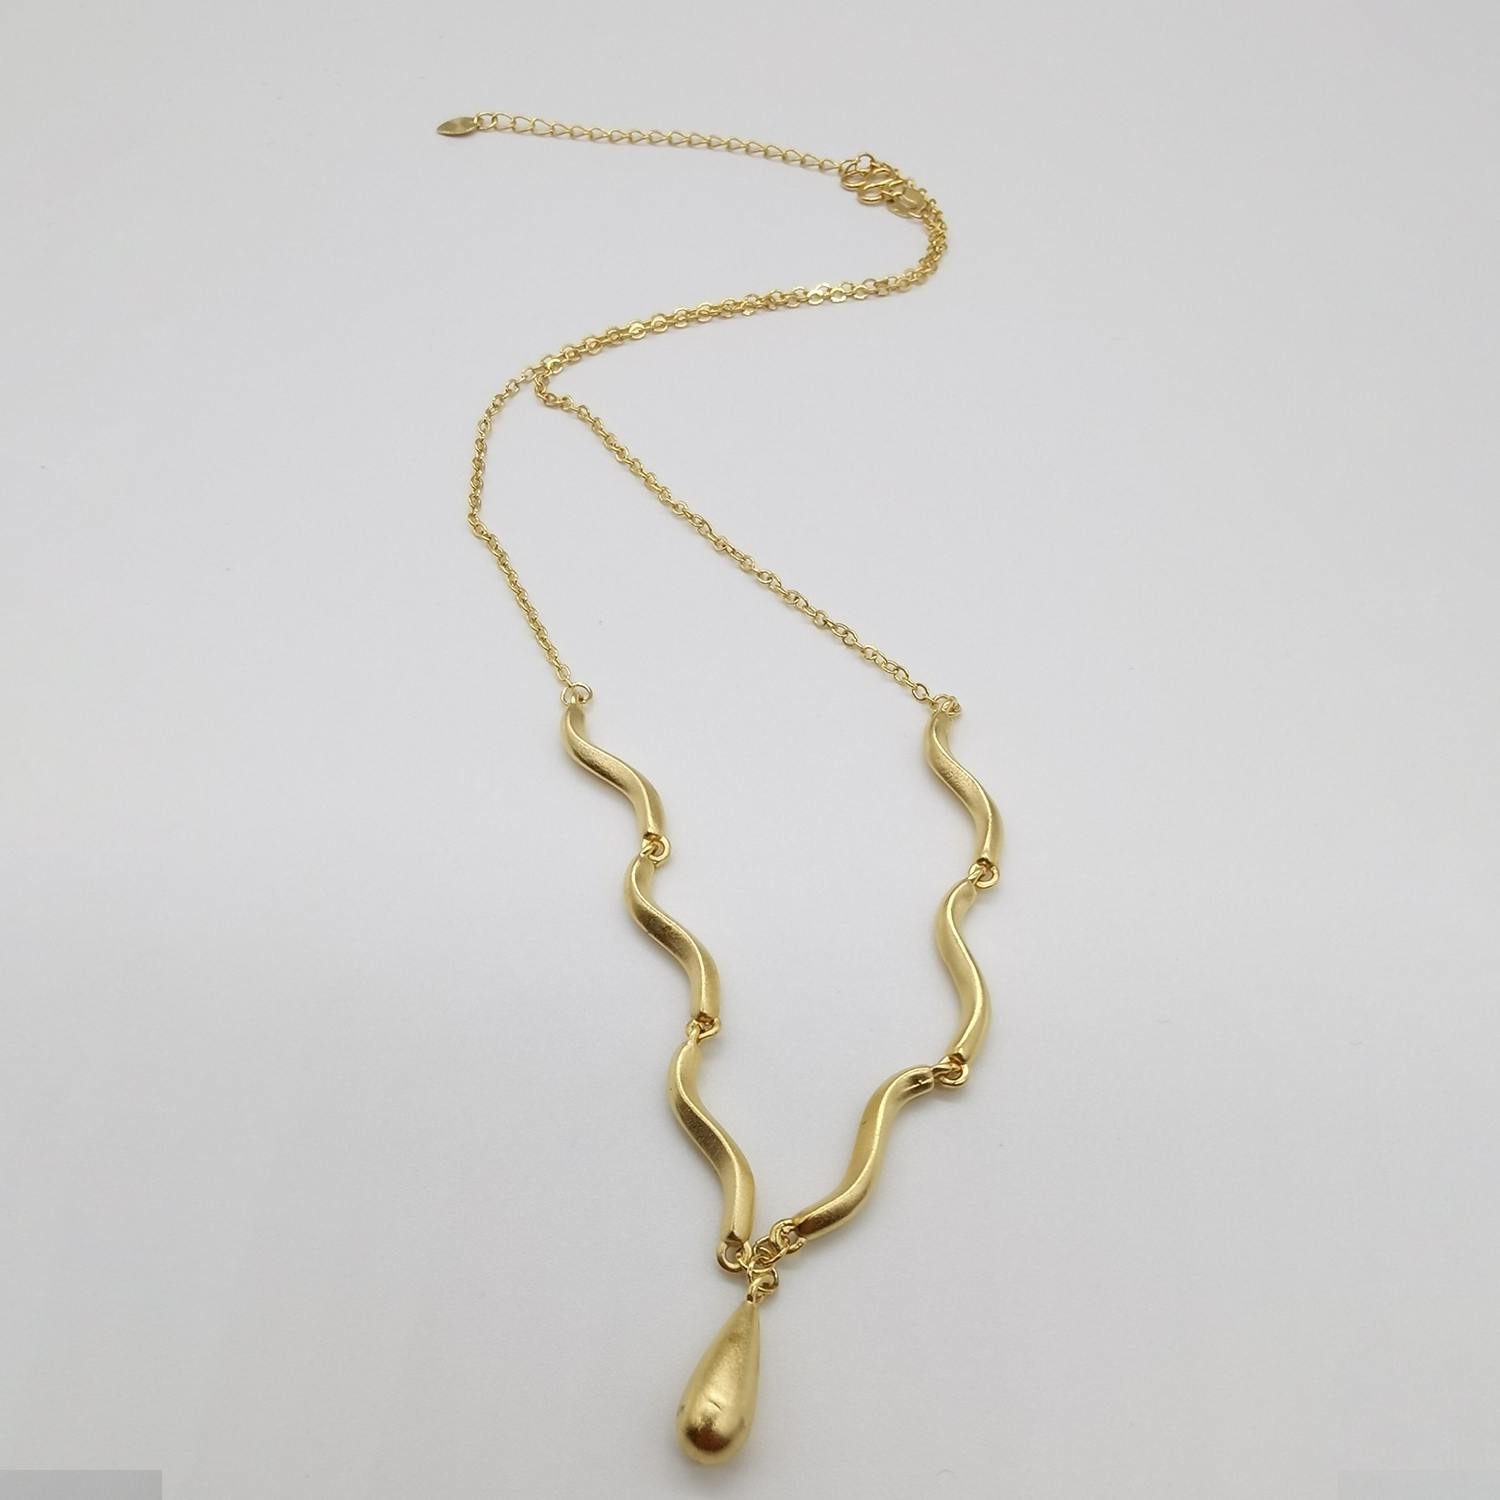 Alluvial gold vacuum electroplating 24K gold water drop necklace